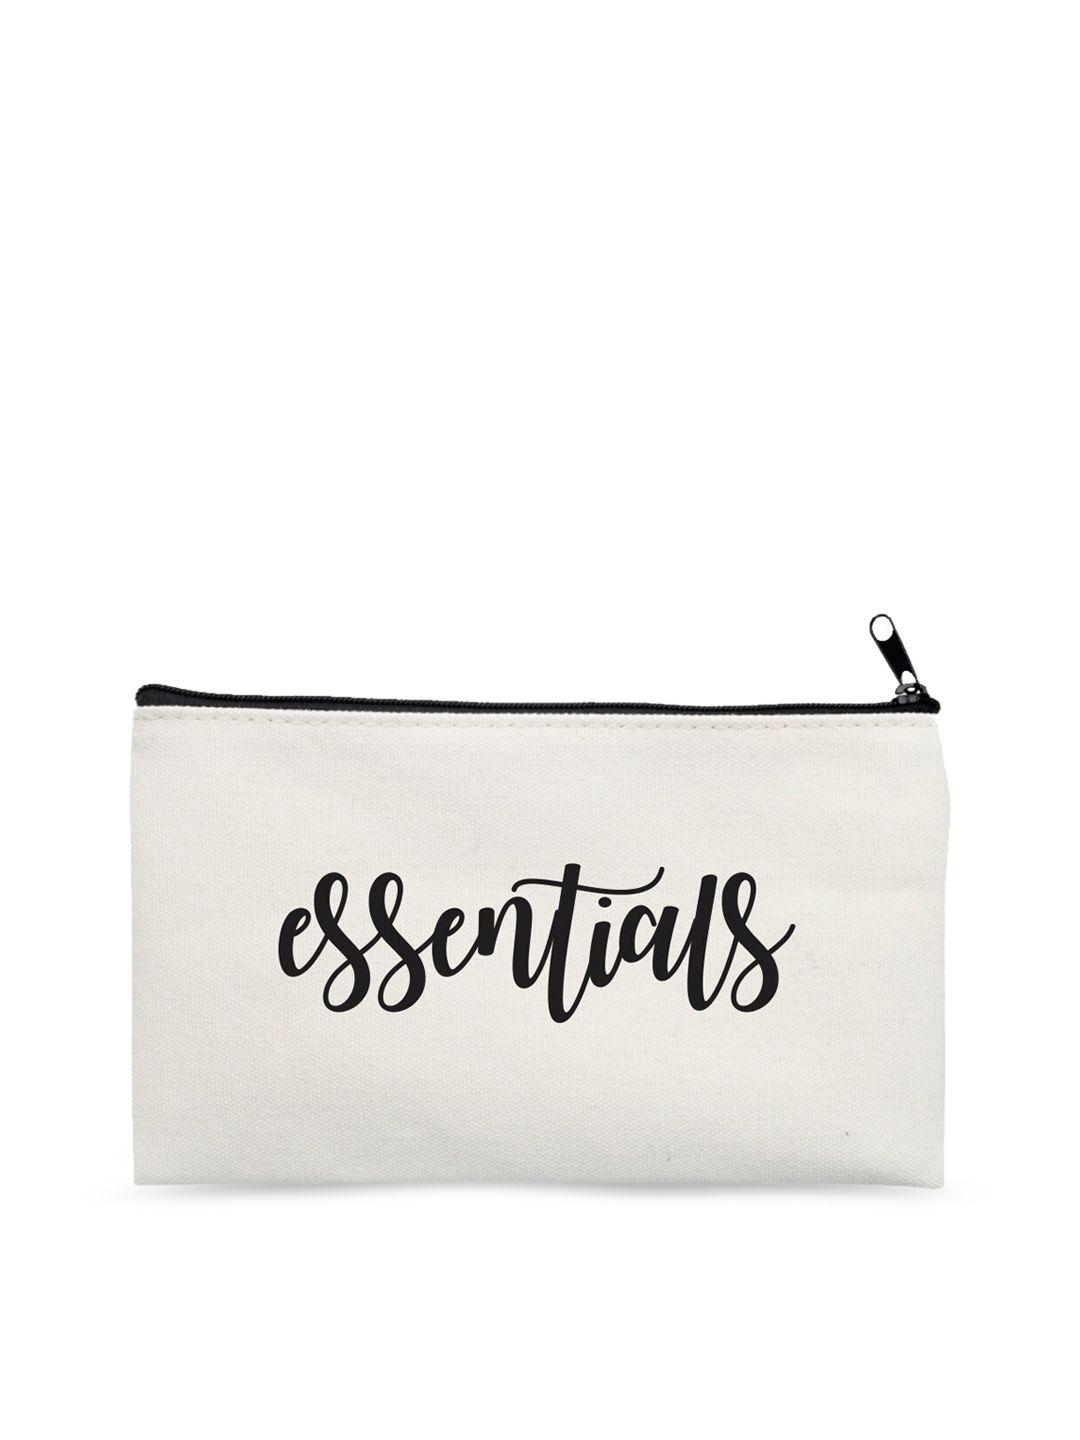 the art people off white & black printed multi purpose travel pouch